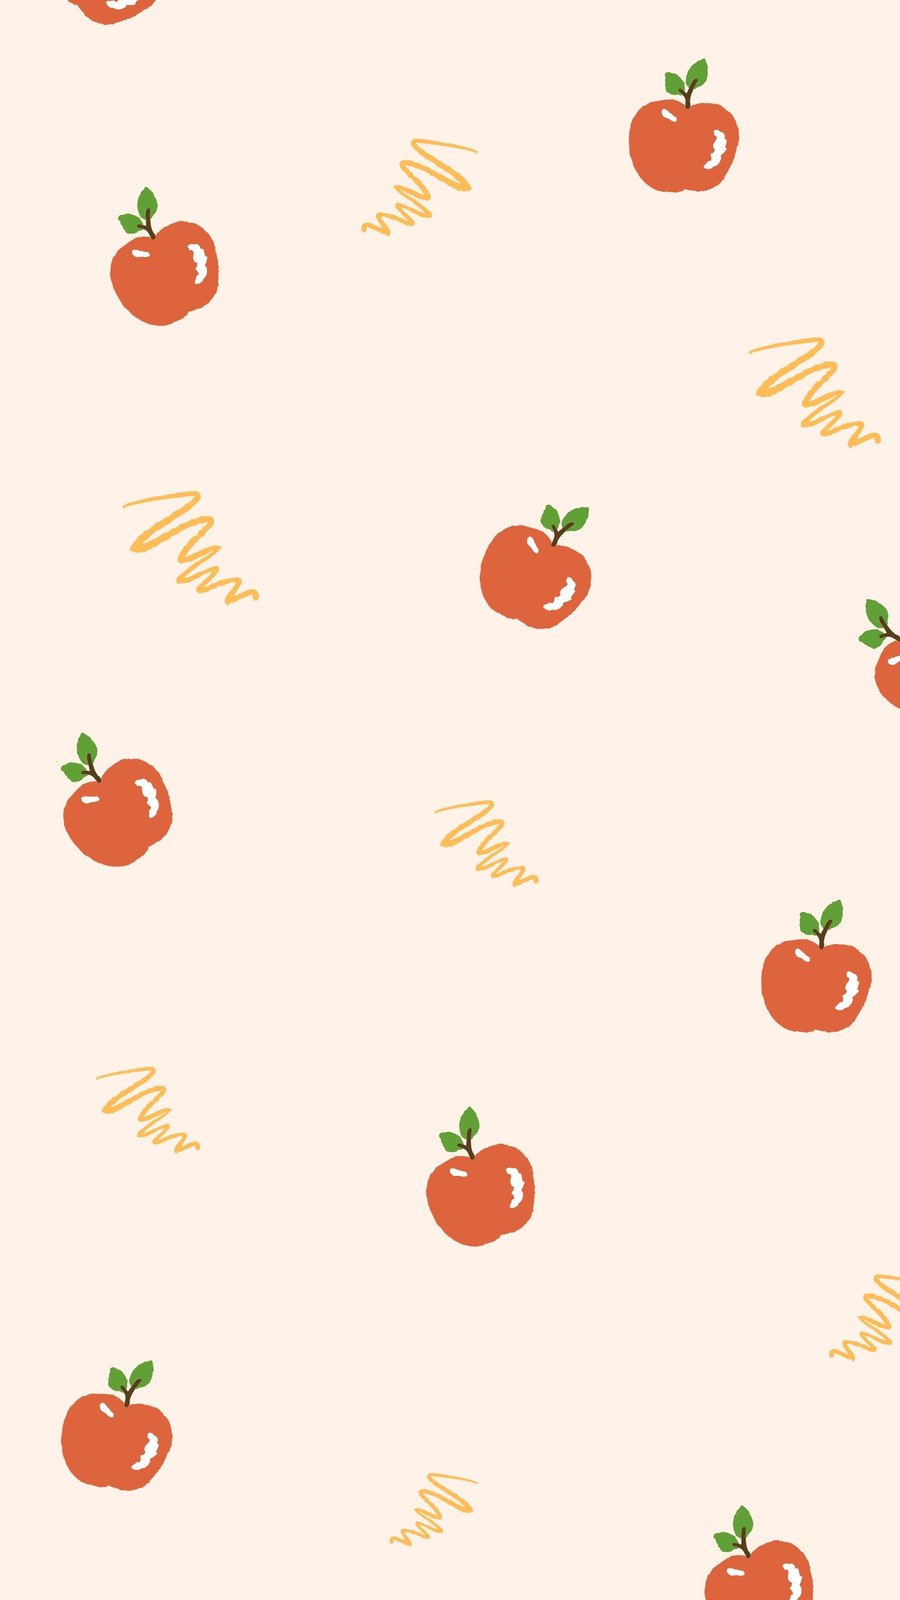 A pattern of apples on white background - Fruit